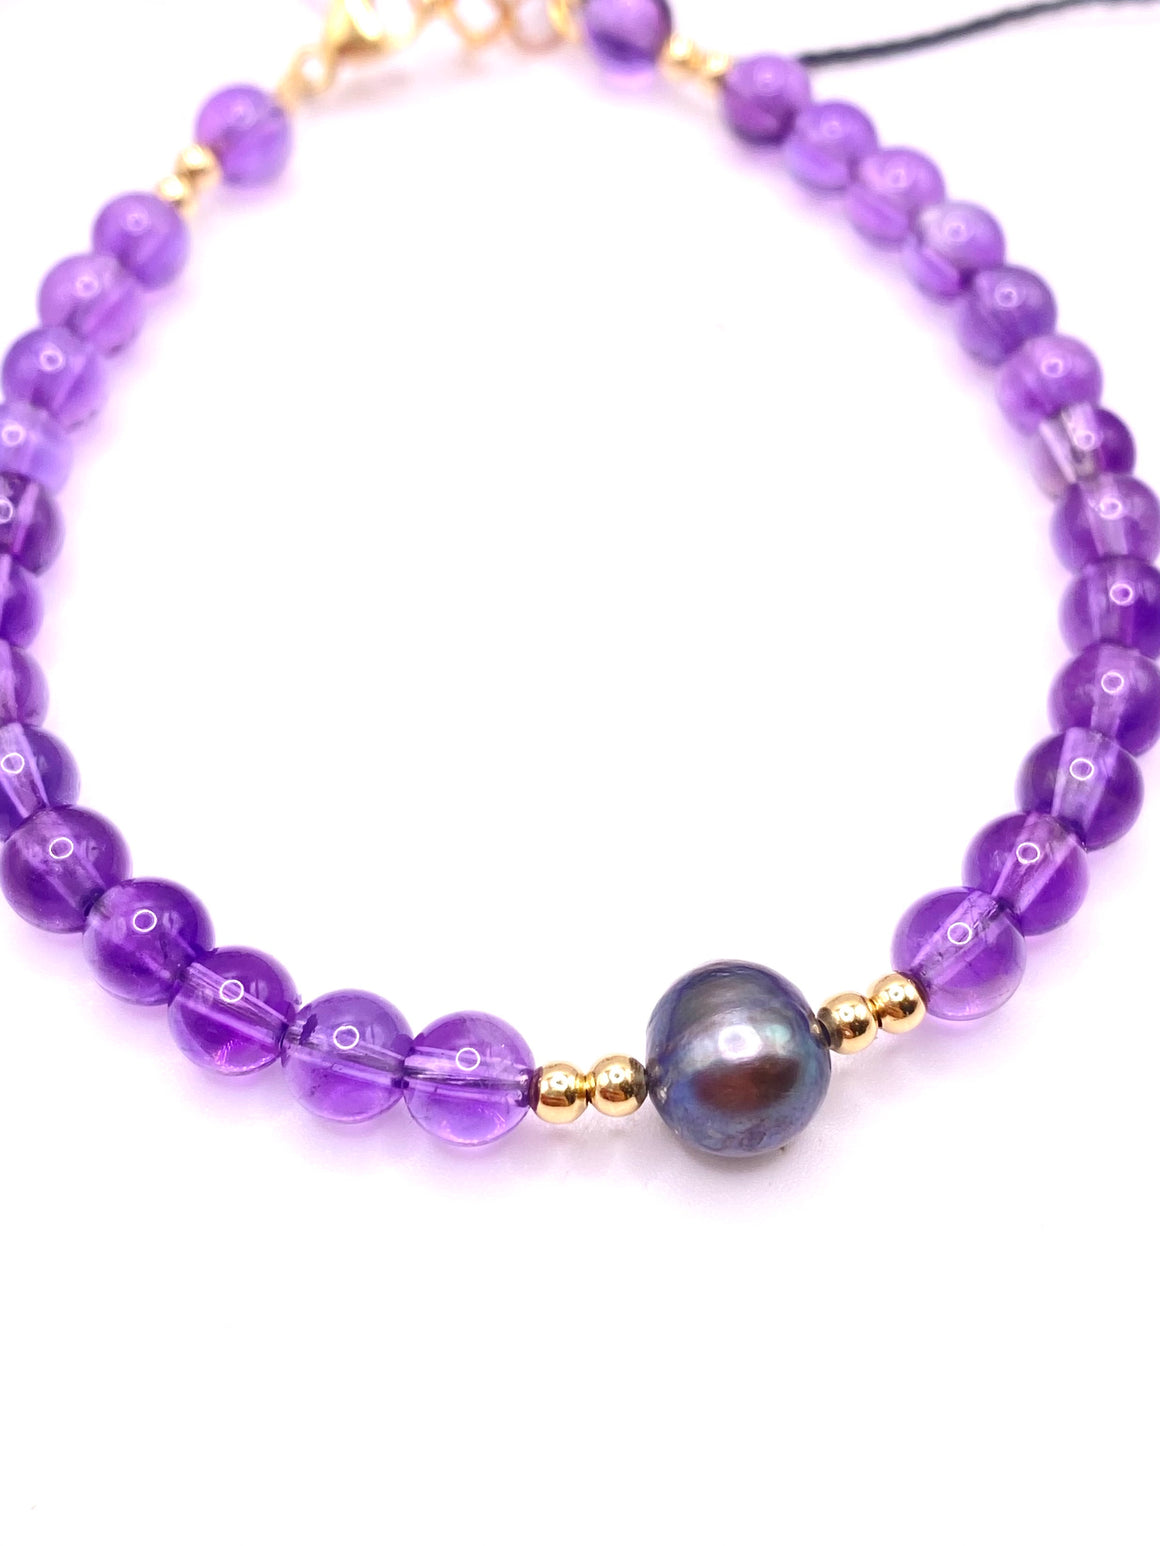 Amethyst and Fresh Water Pearl 14K Gold Filled Bracelet